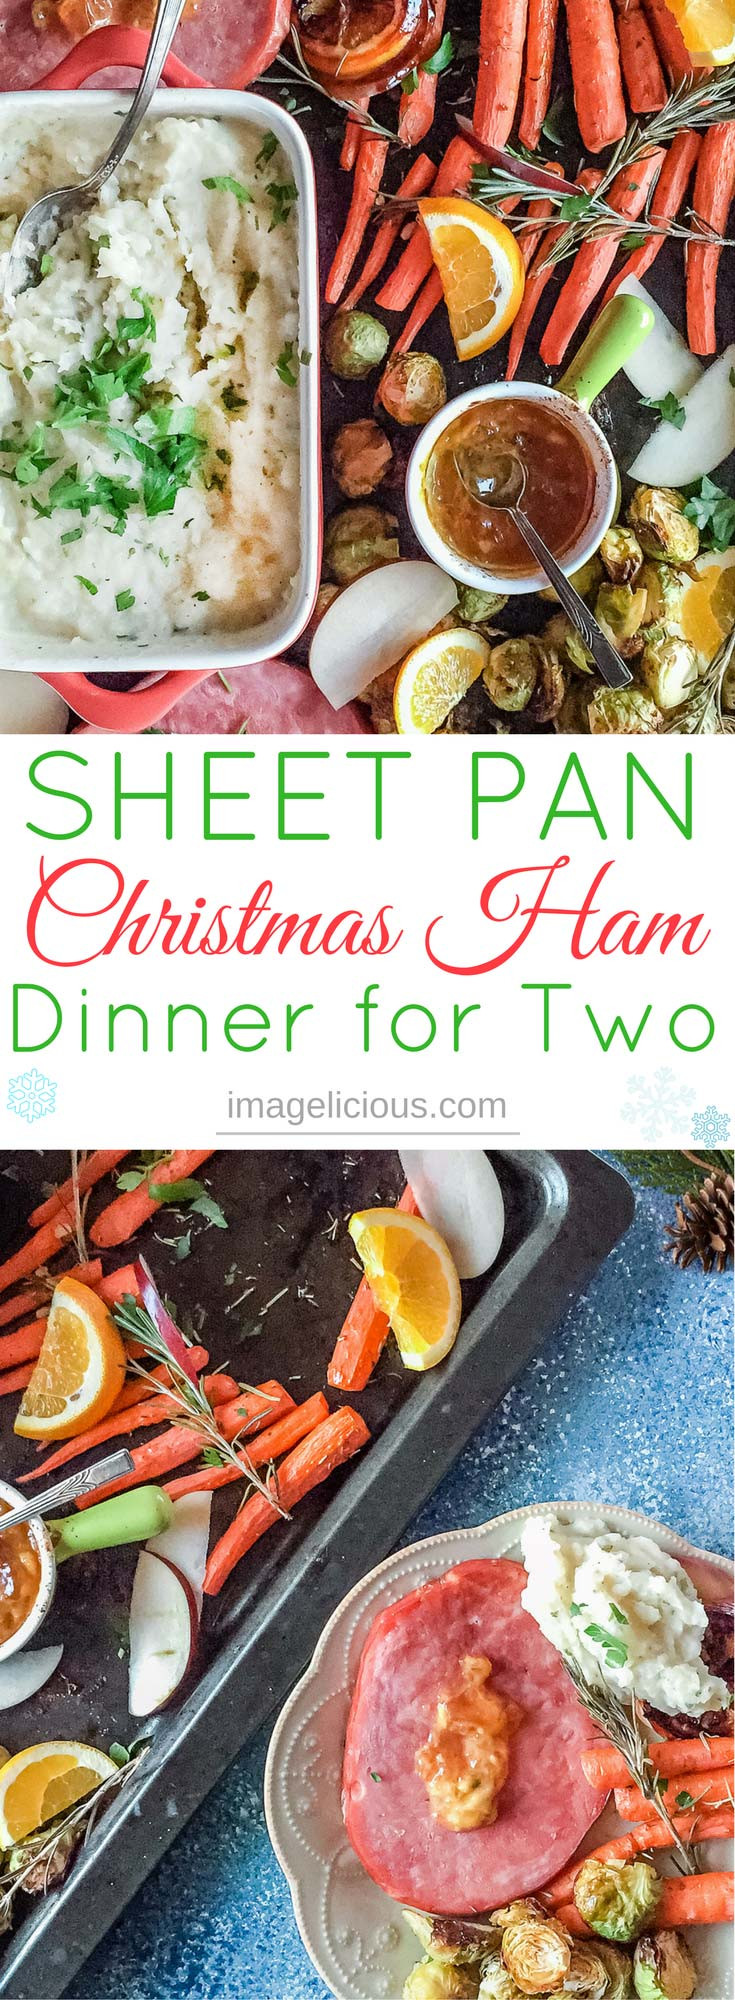 Christmas Dinners For 2
 Sheet Pan Christmas Ham Dinner For Two Imagelicious